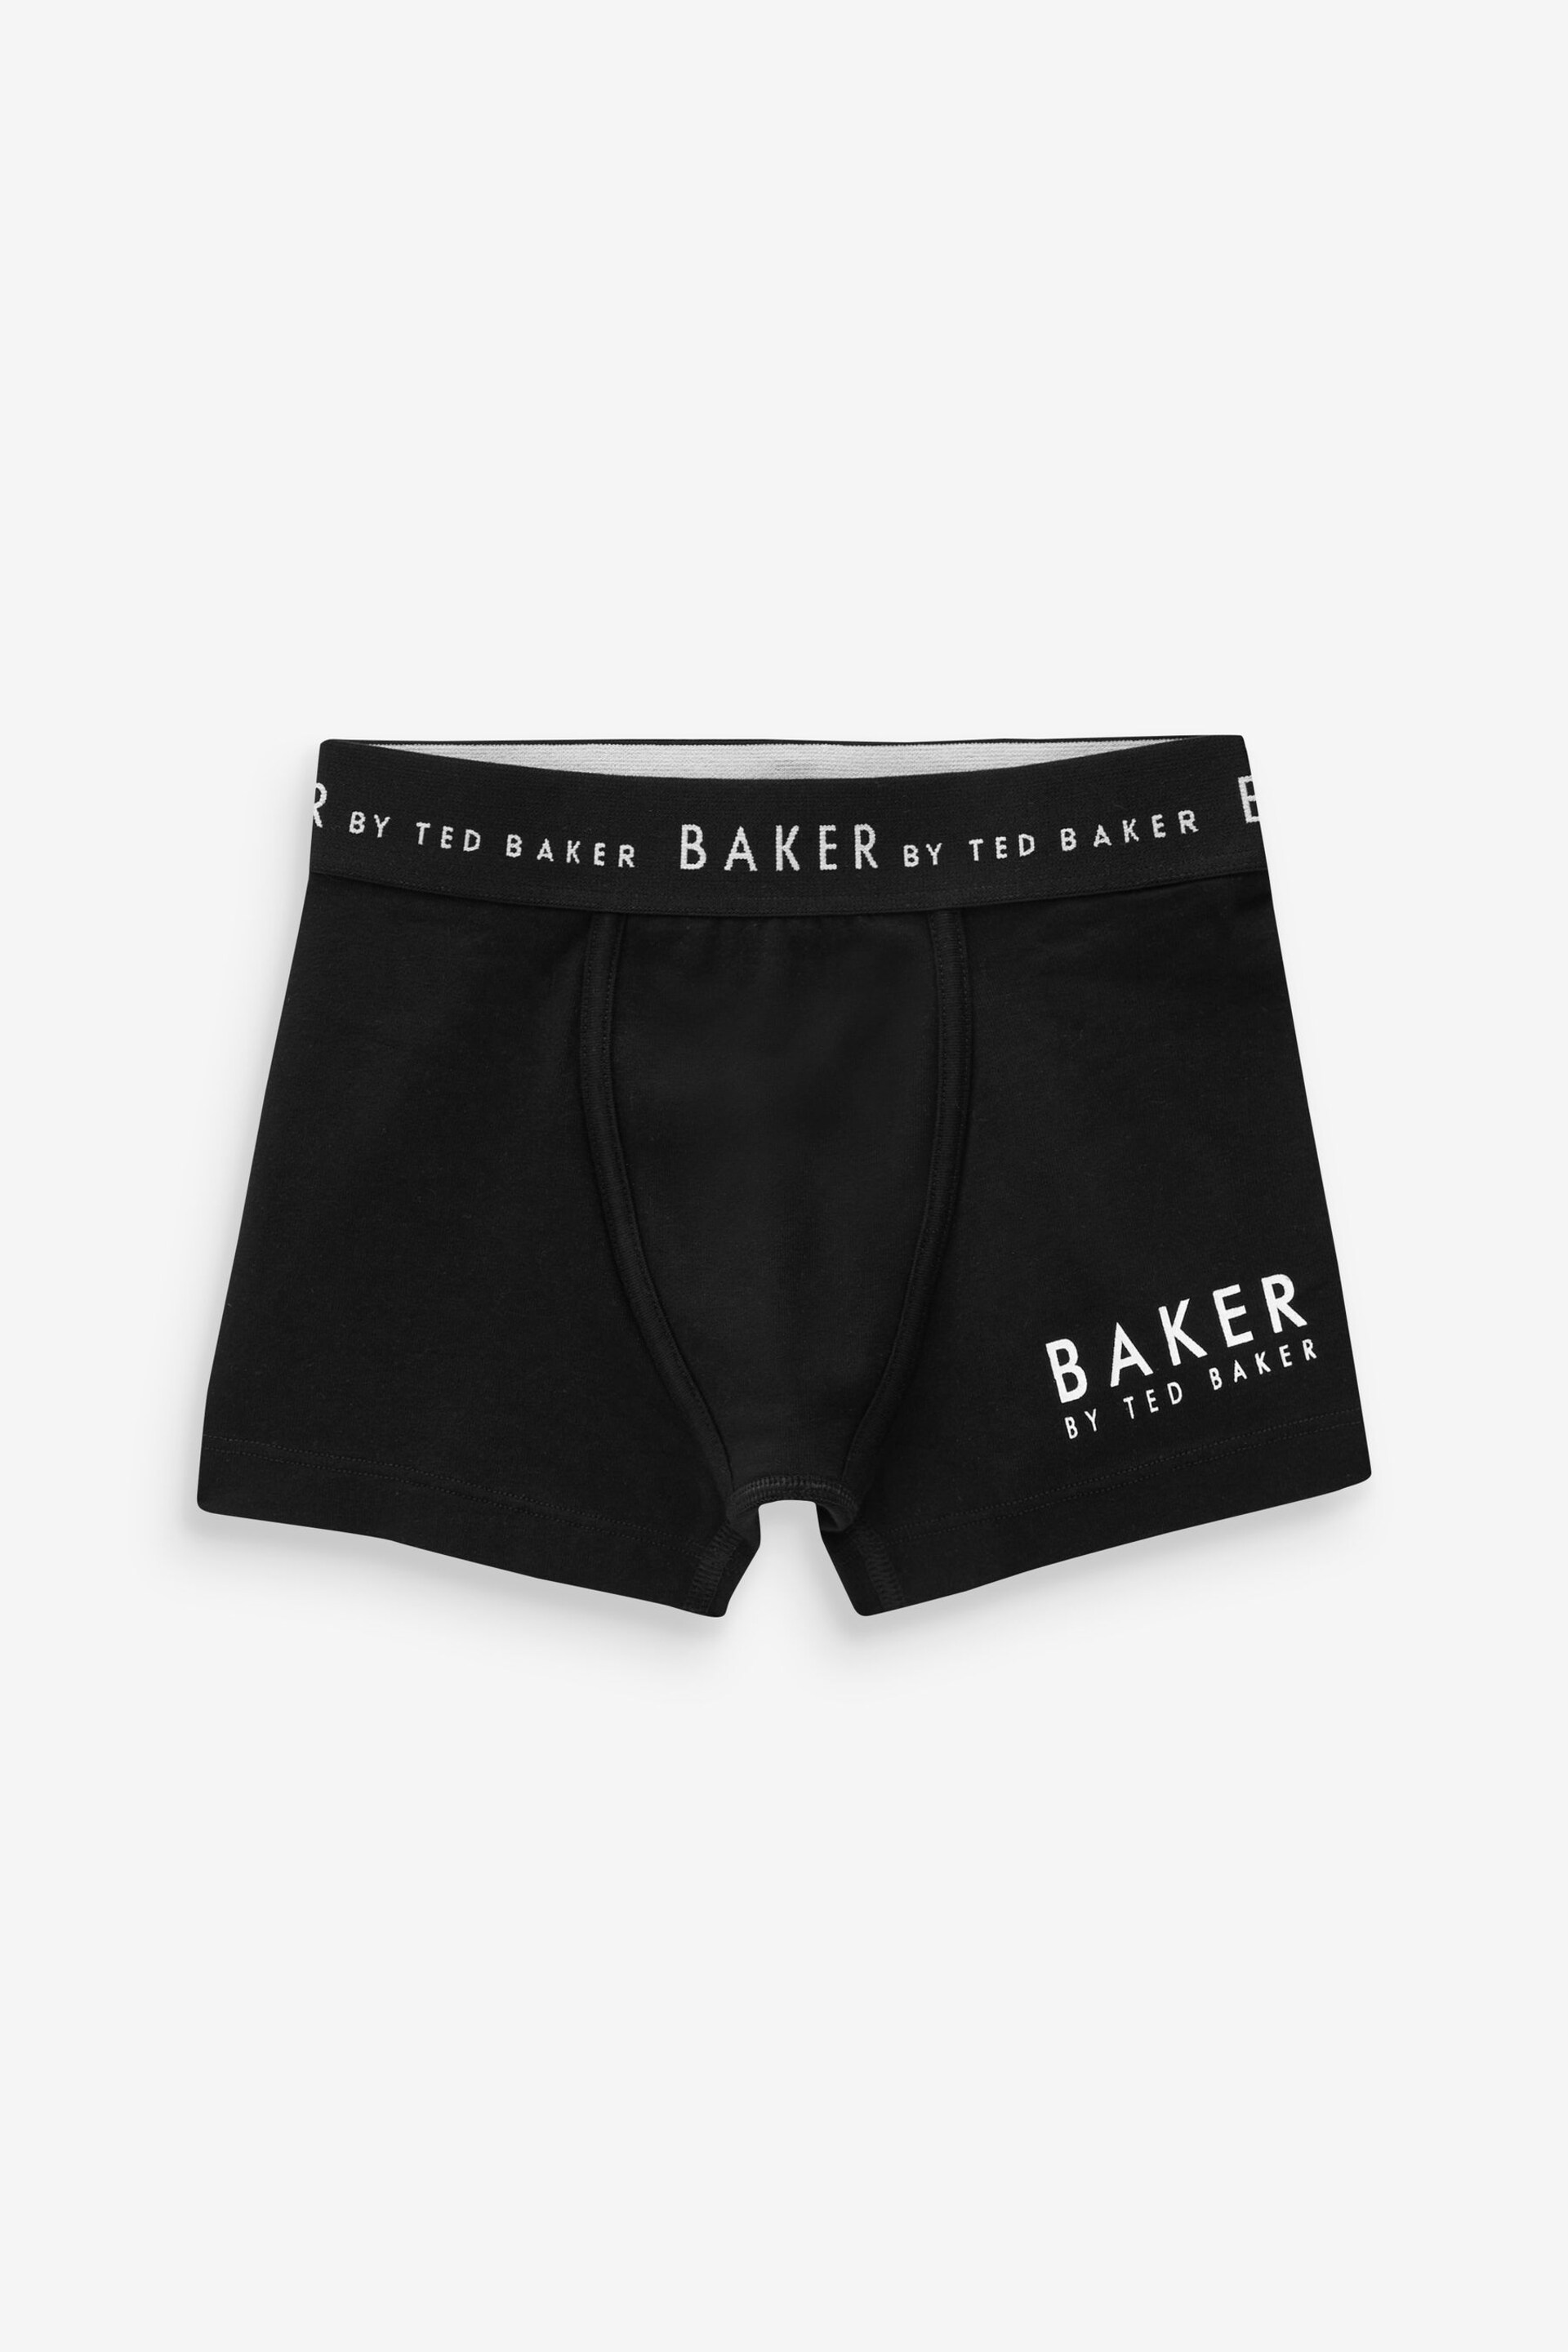 Baker by Ted Baker Boxers 3 Pack - Image 2 of 5